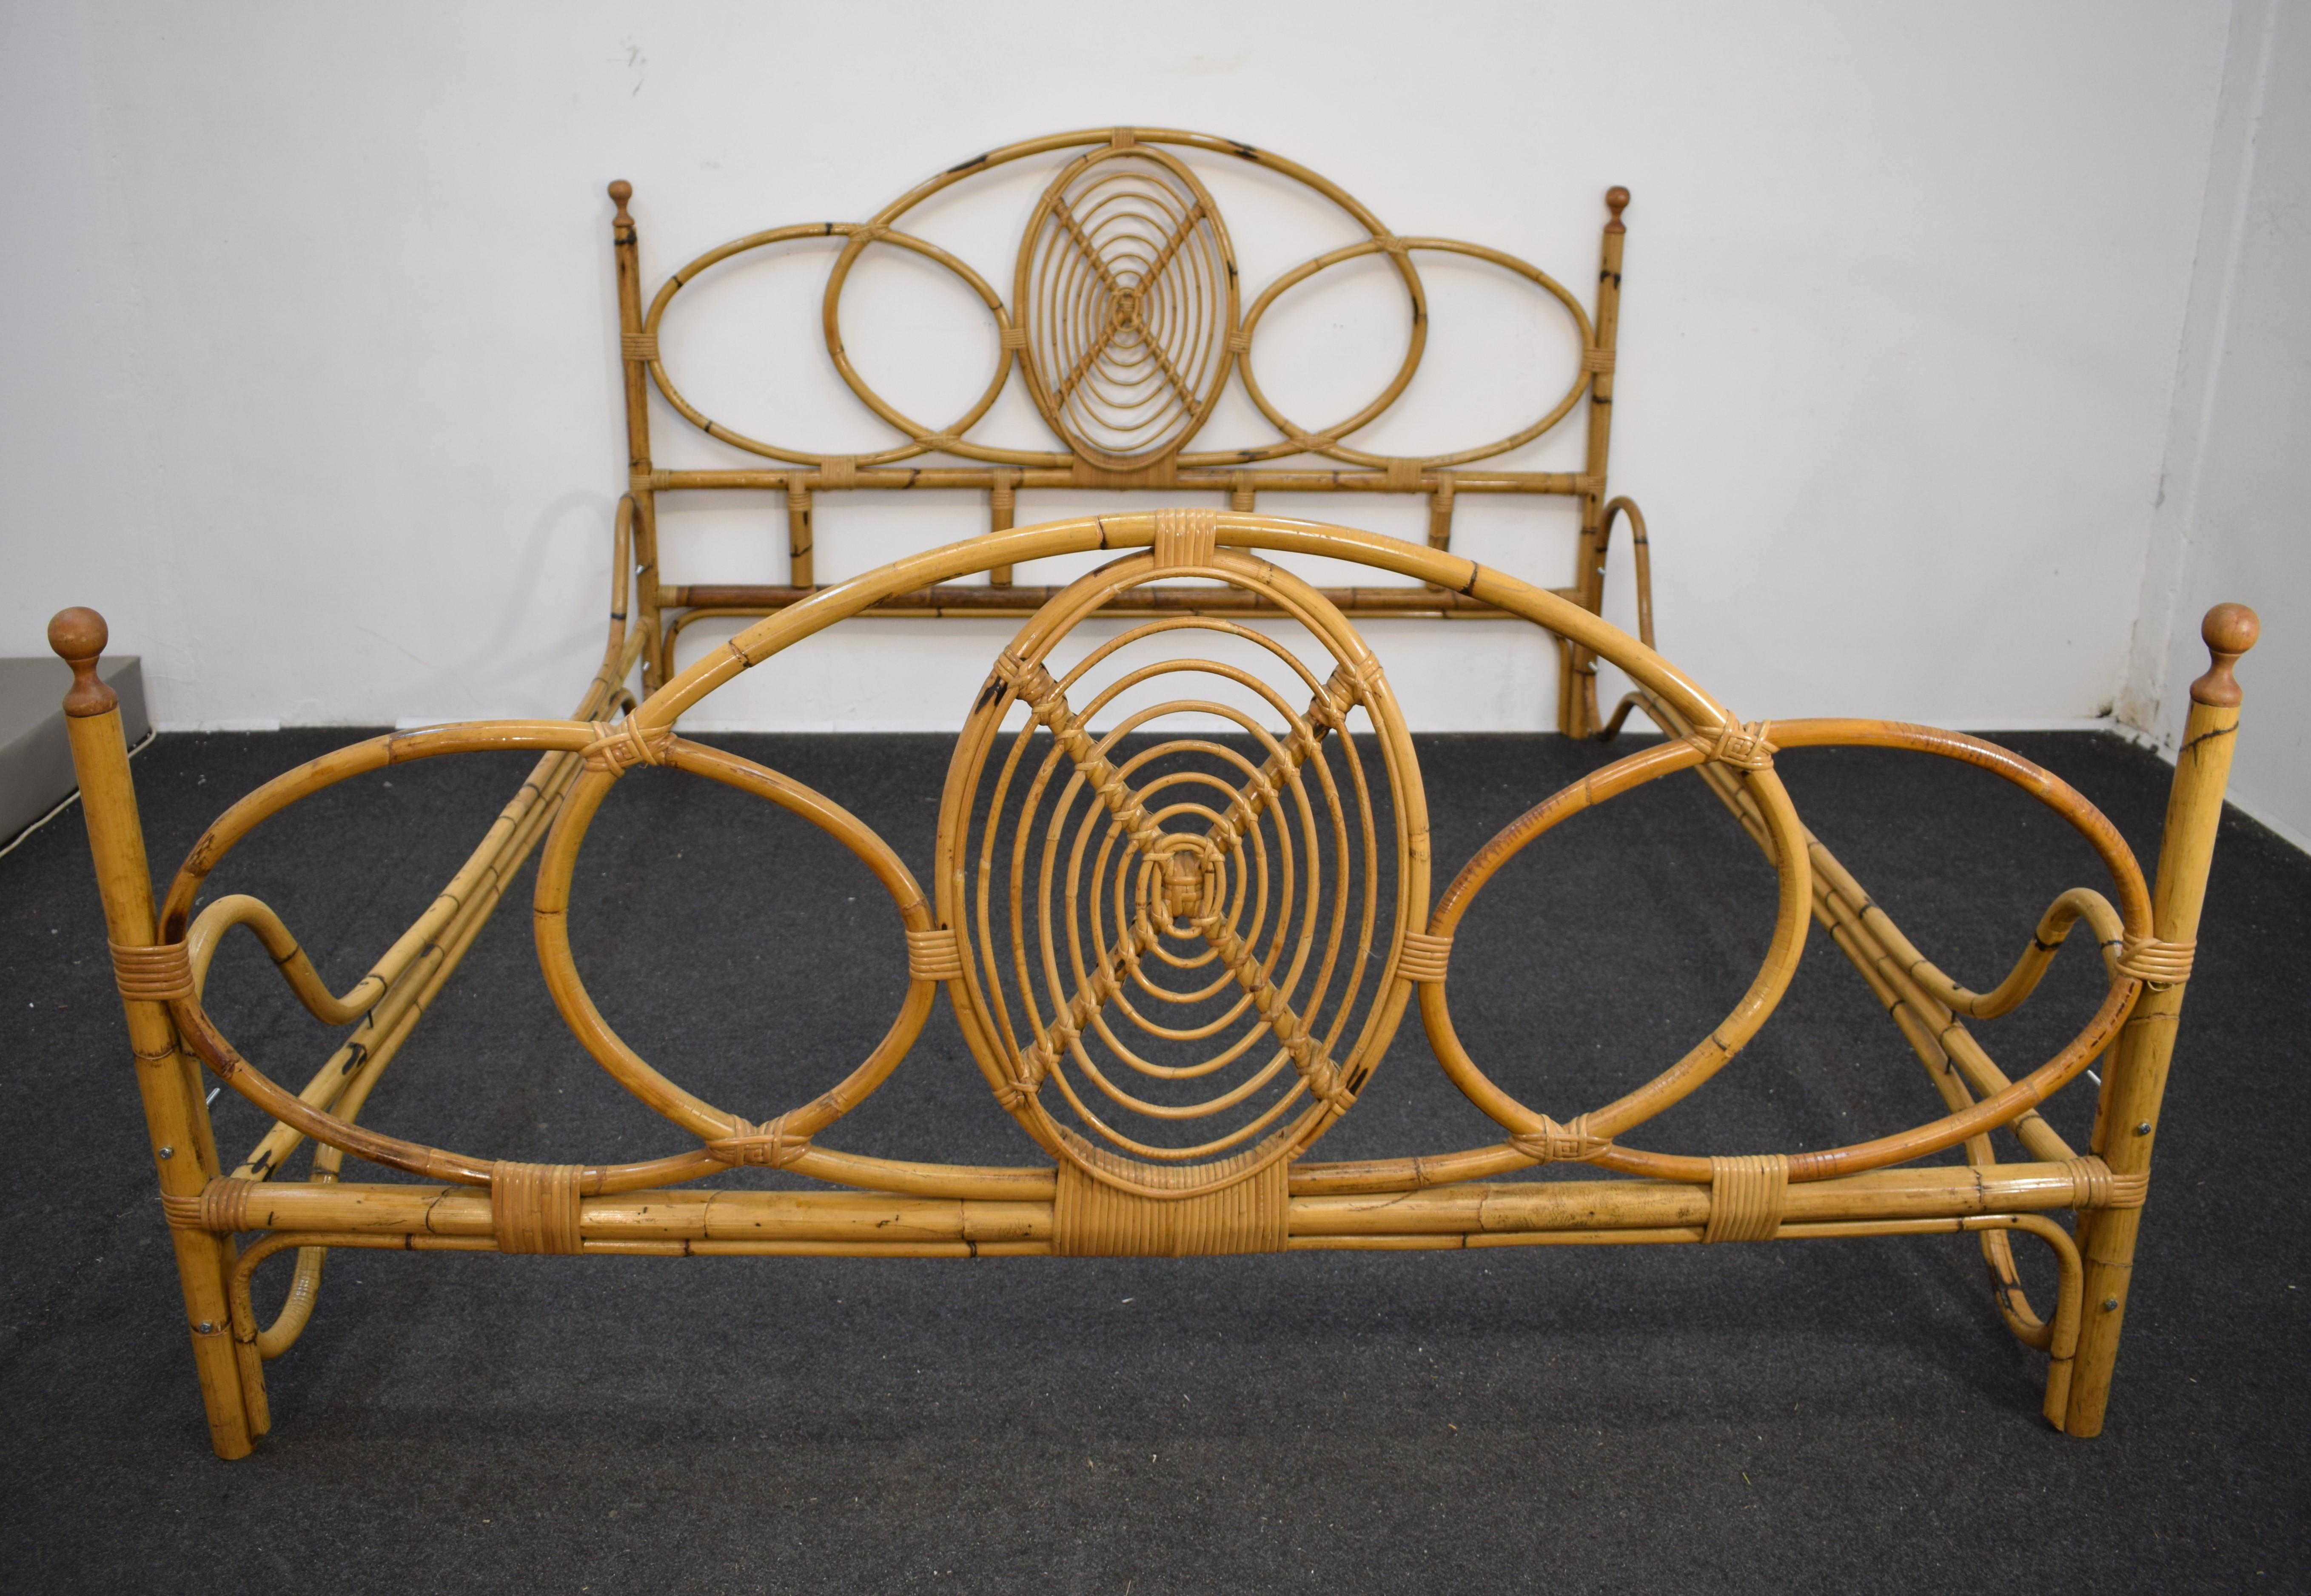 Italian Design Mid-Century Bamboo Bed, 1960s For Sale 1